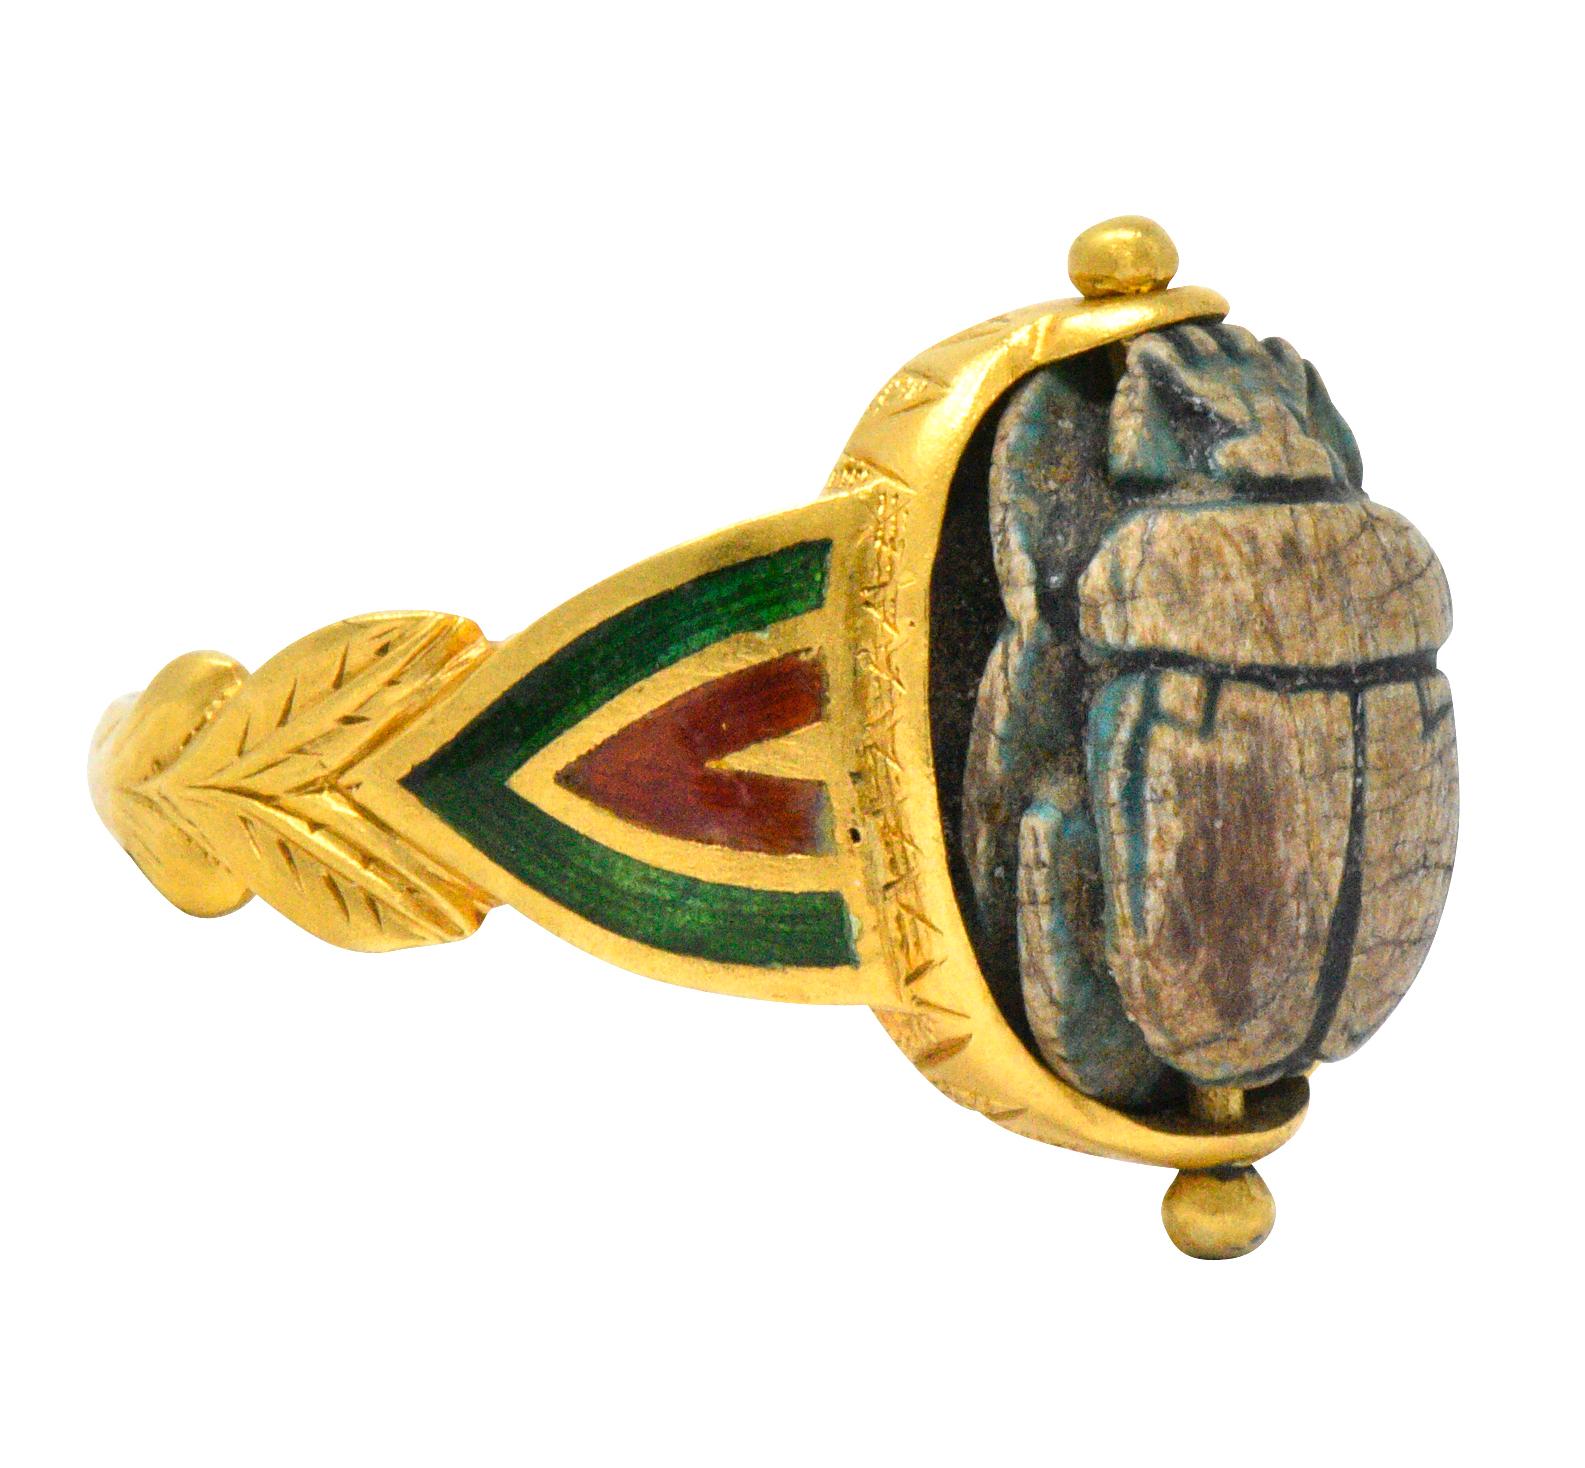 Centering scarab with minor remnants of faience

Green and red enamel chevron detail on shoulders

Matte gold finish with leaf detail

Tested as 14 karat gold

Ring Size: 9 1/2 & Not Sizable

Top Measures: 17 x 10 mm and sits 7 mm high

Total